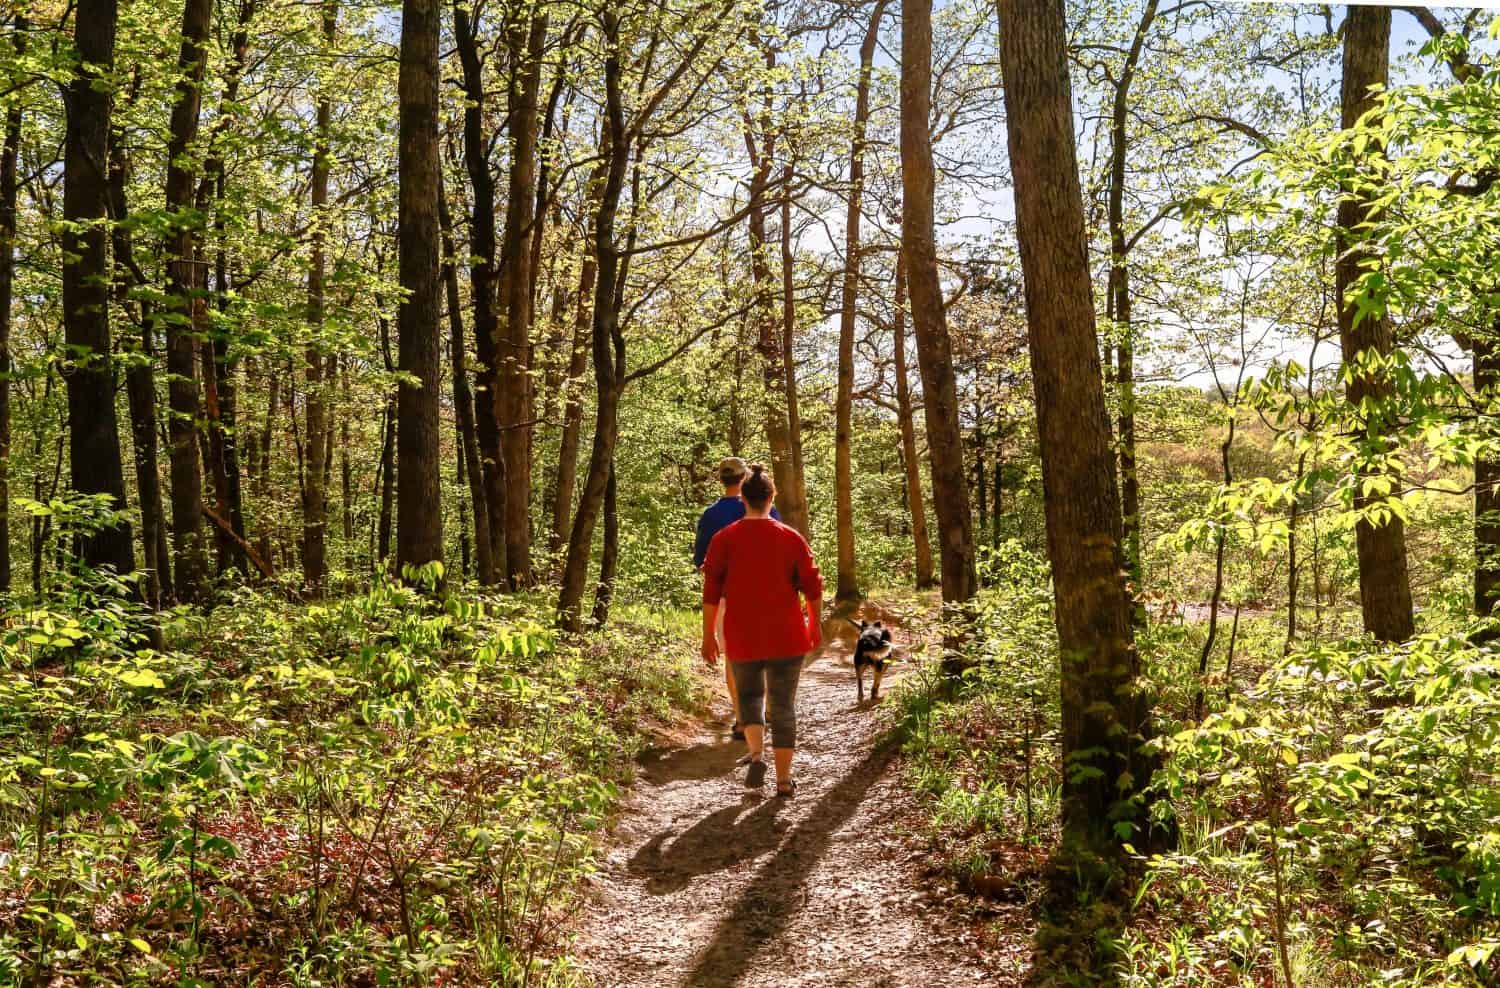 Overweight young woman and a young man taking a walk in the woods with their dog; Missouri State Park, Midwest